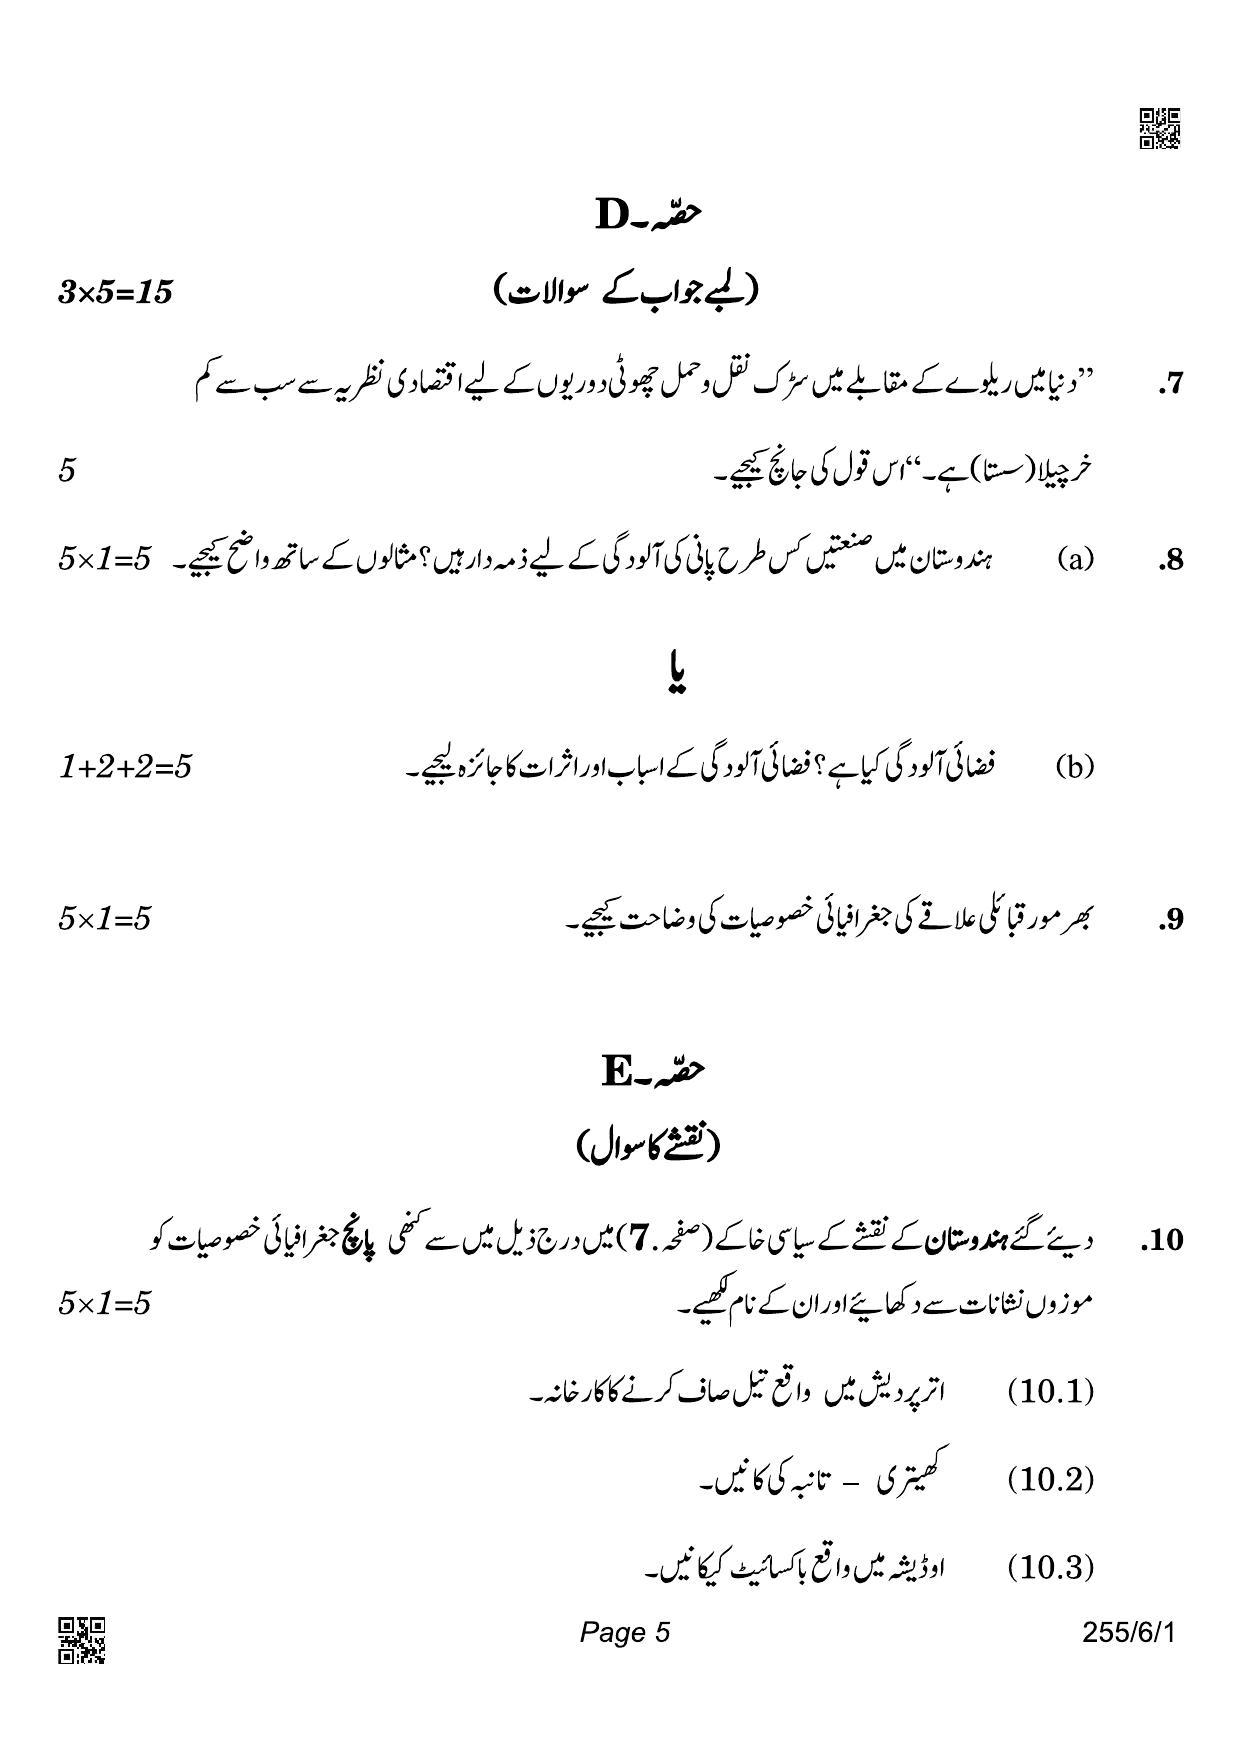 CBSE Class 12 255-6-1 Geography Urdu 2022 Compartment Question Paper - Page 5